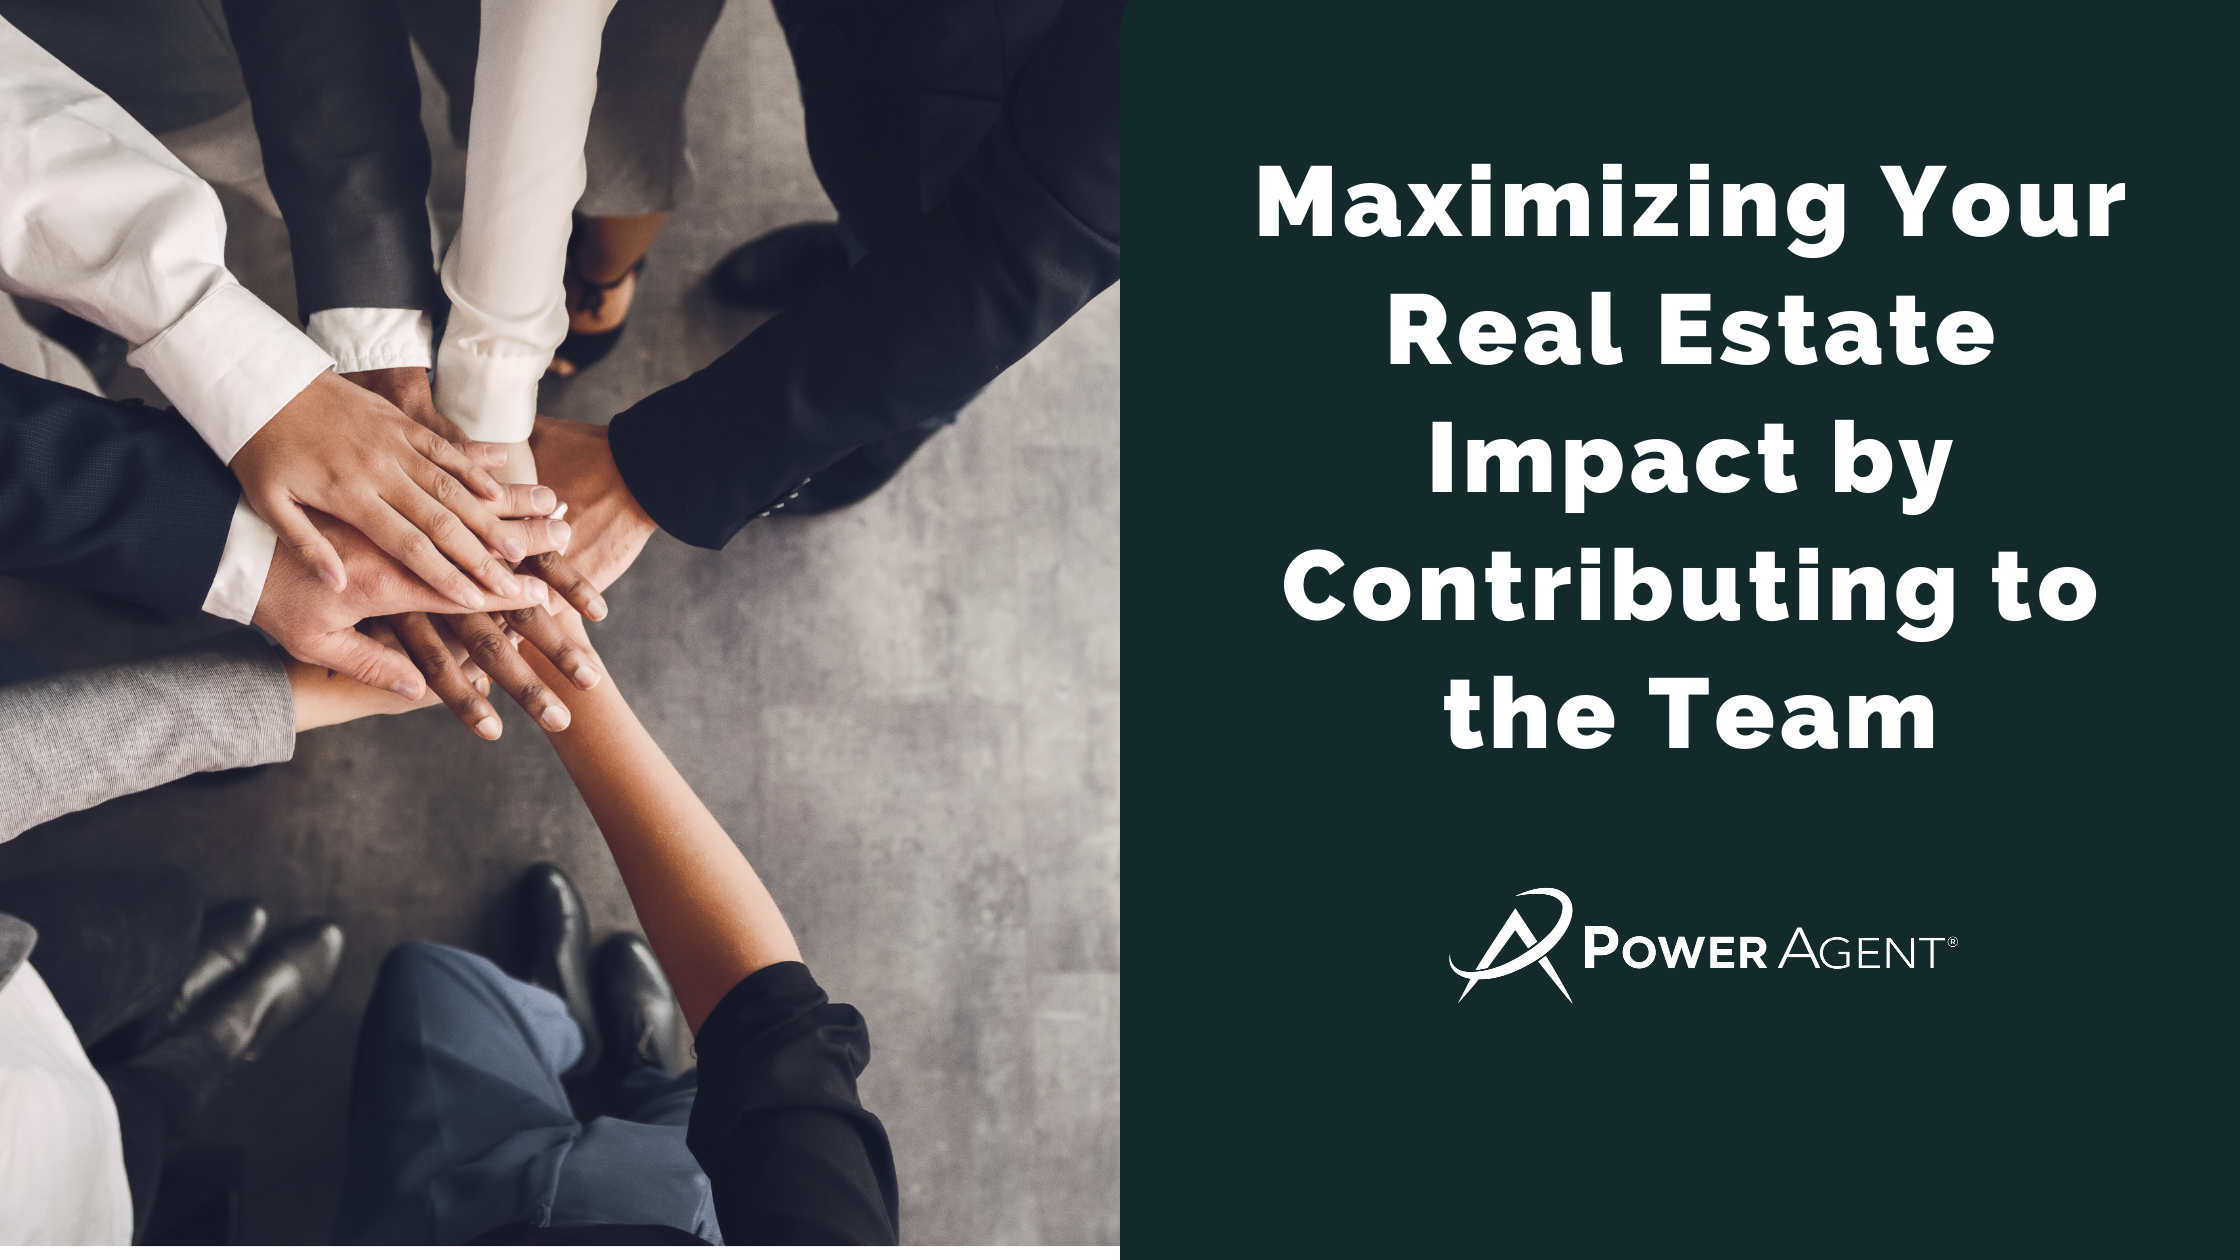 Maximizing Your Real Estate Impact by Contributing to the Team